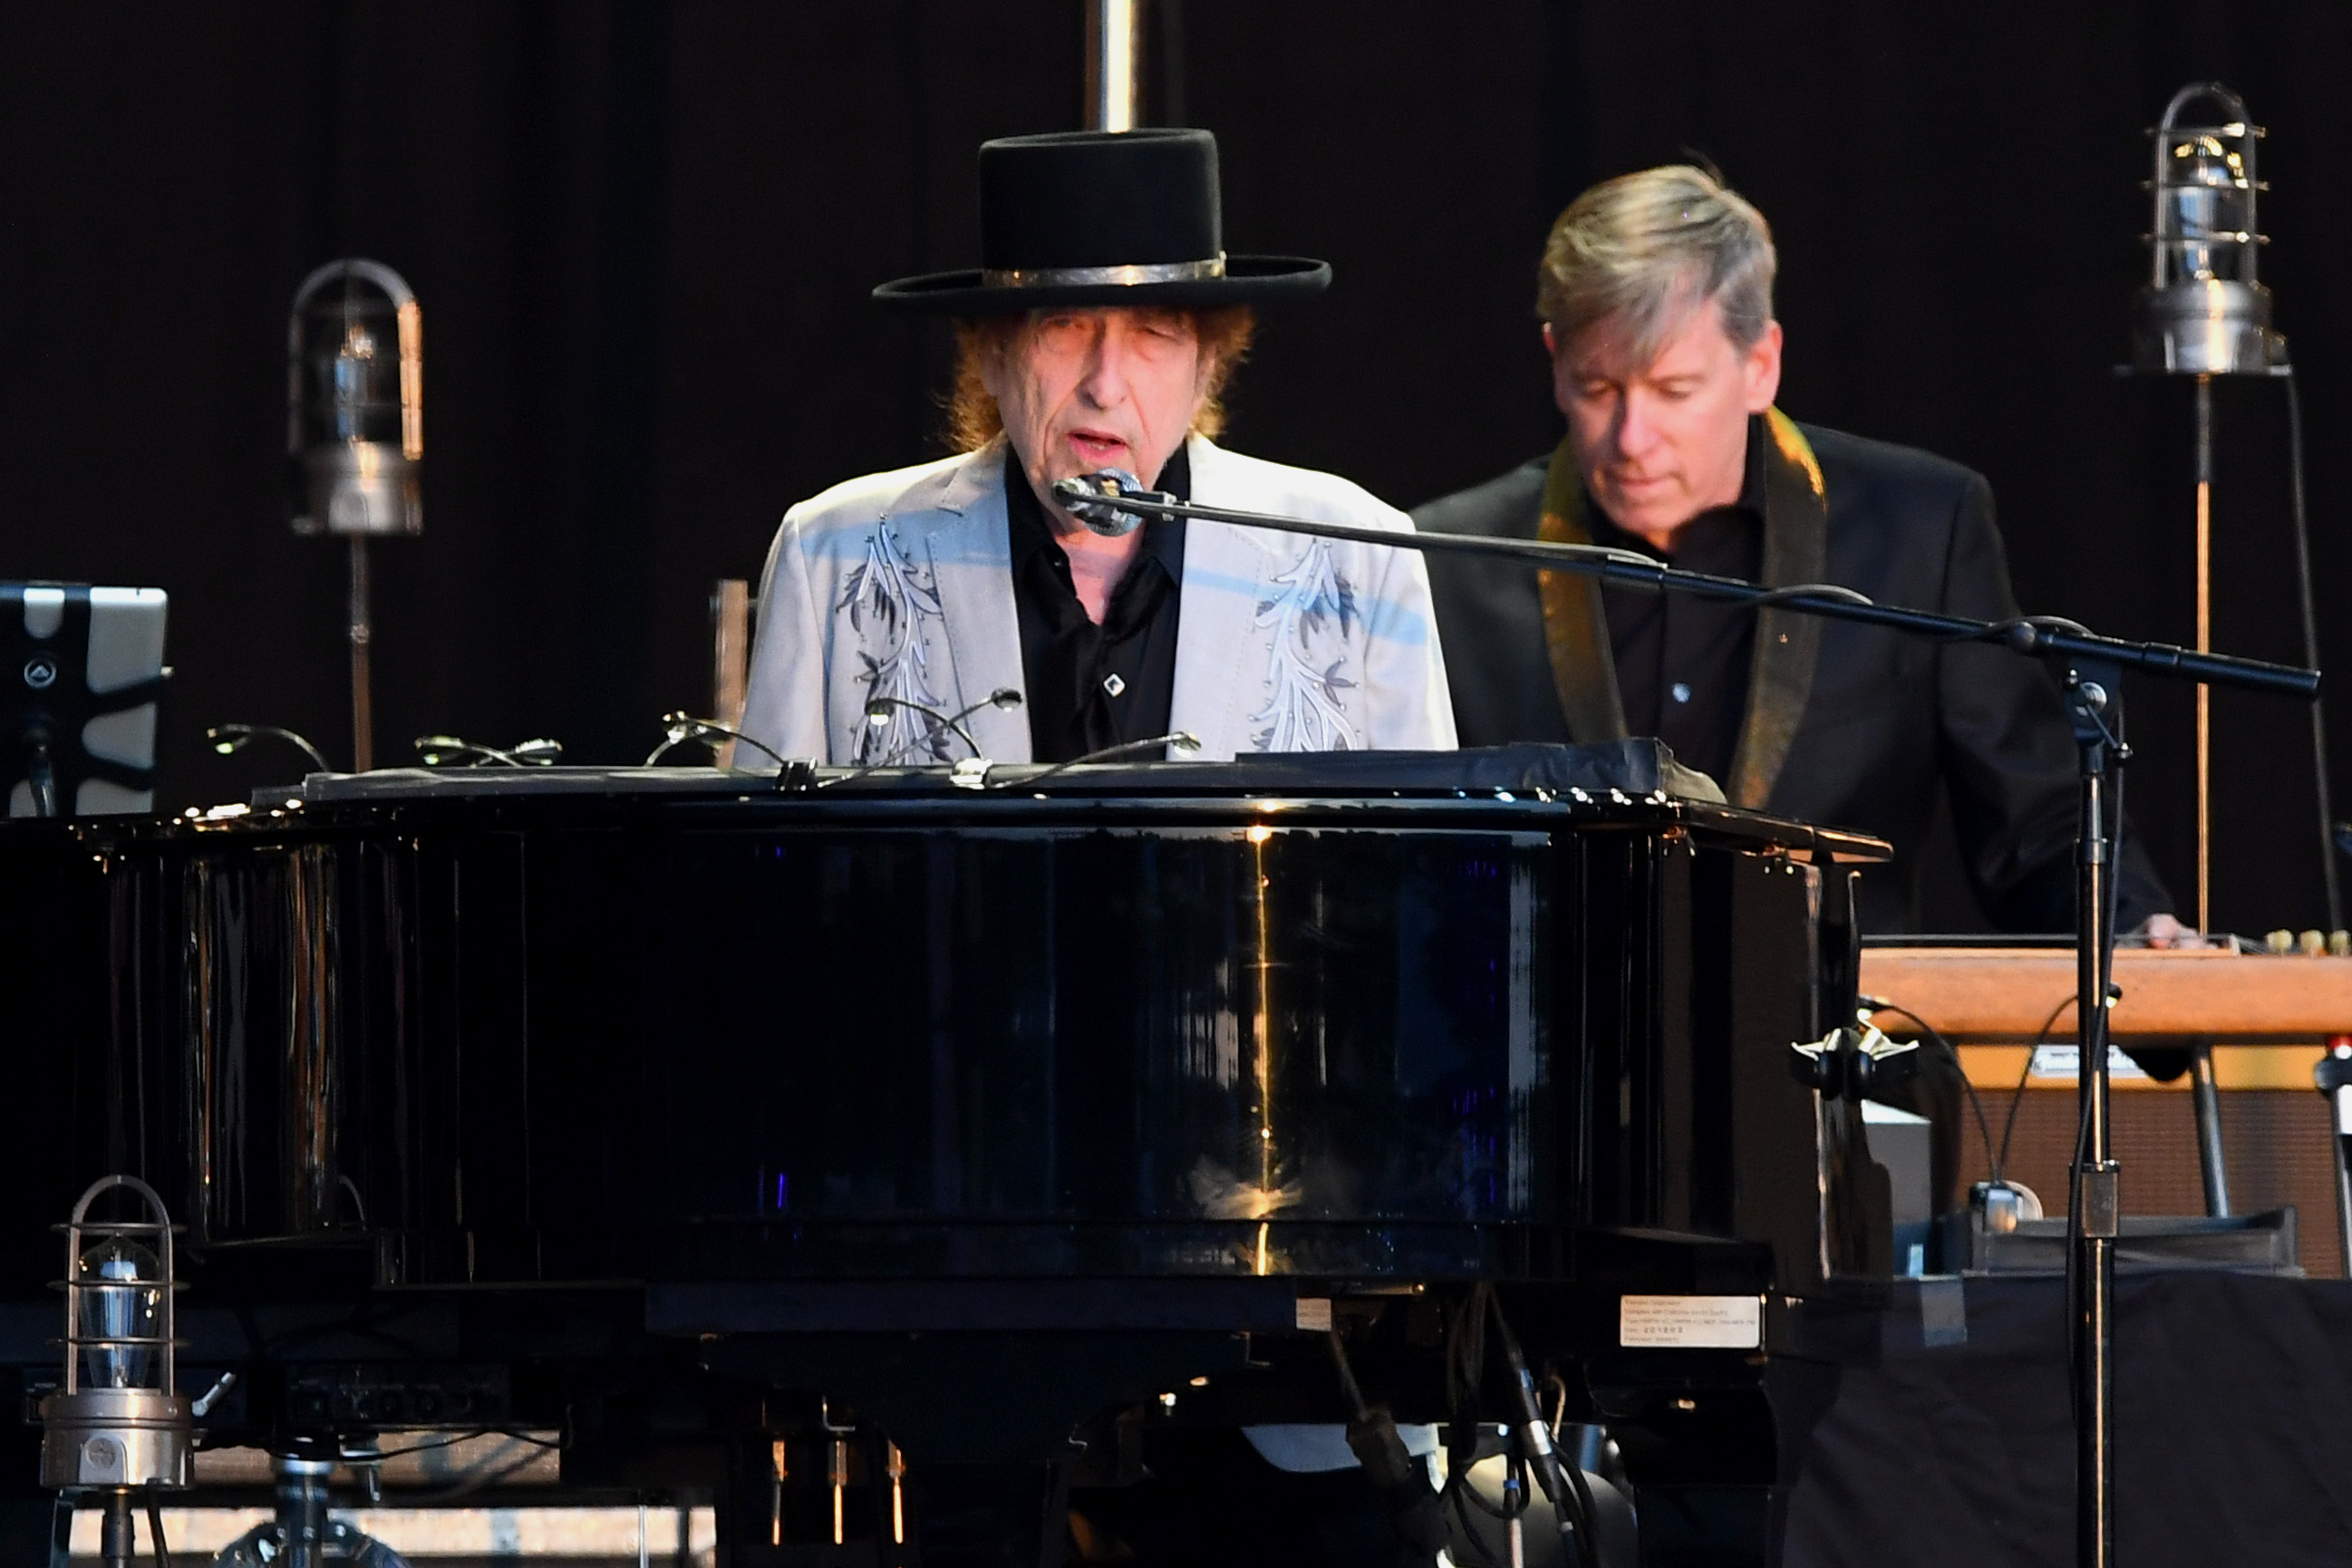 Bob Dylan performs as part of a double bill with Neil Young at Hyde Park on July 12, 2019 in London, England. The musician recently responded to a sex abuse lawsuit against him.